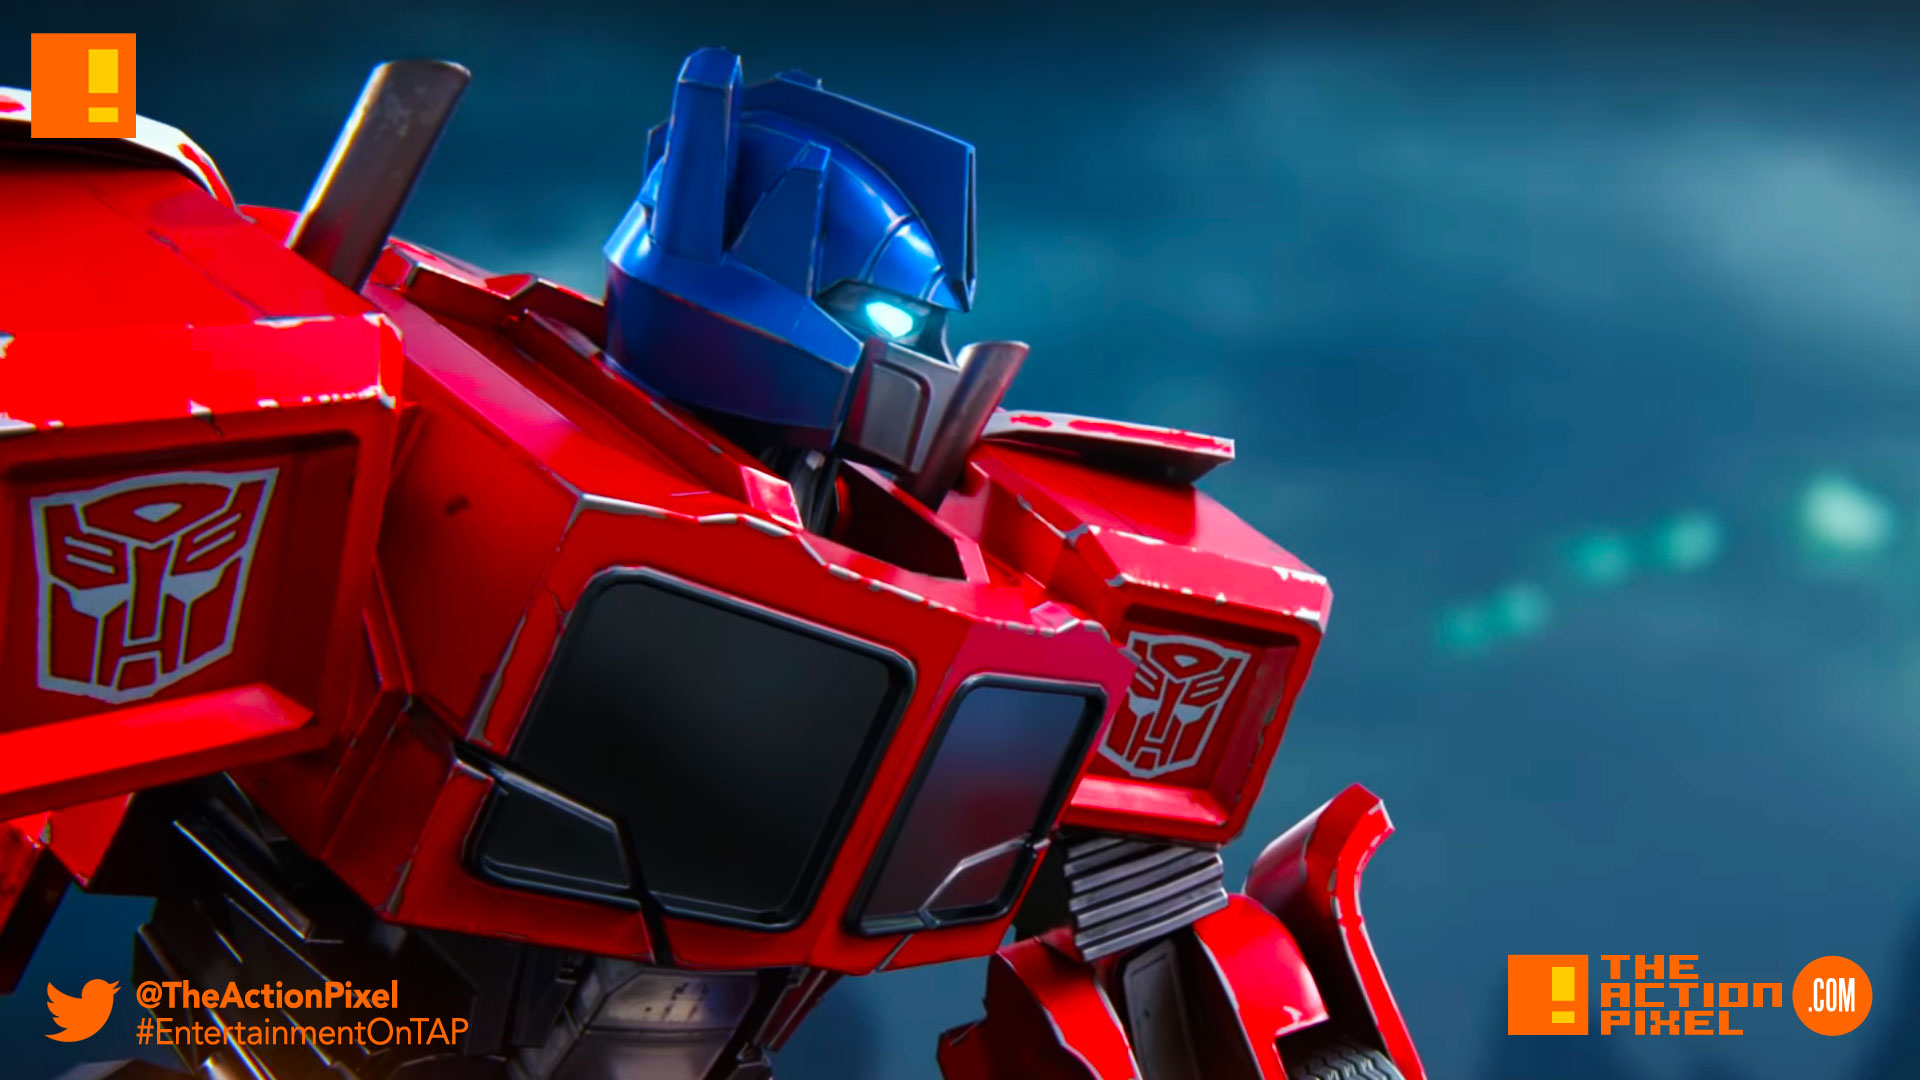 transformers, forged to fight, kabam, trailer, autobots, decepticons, roll out, entertainment on tap, the action pixel